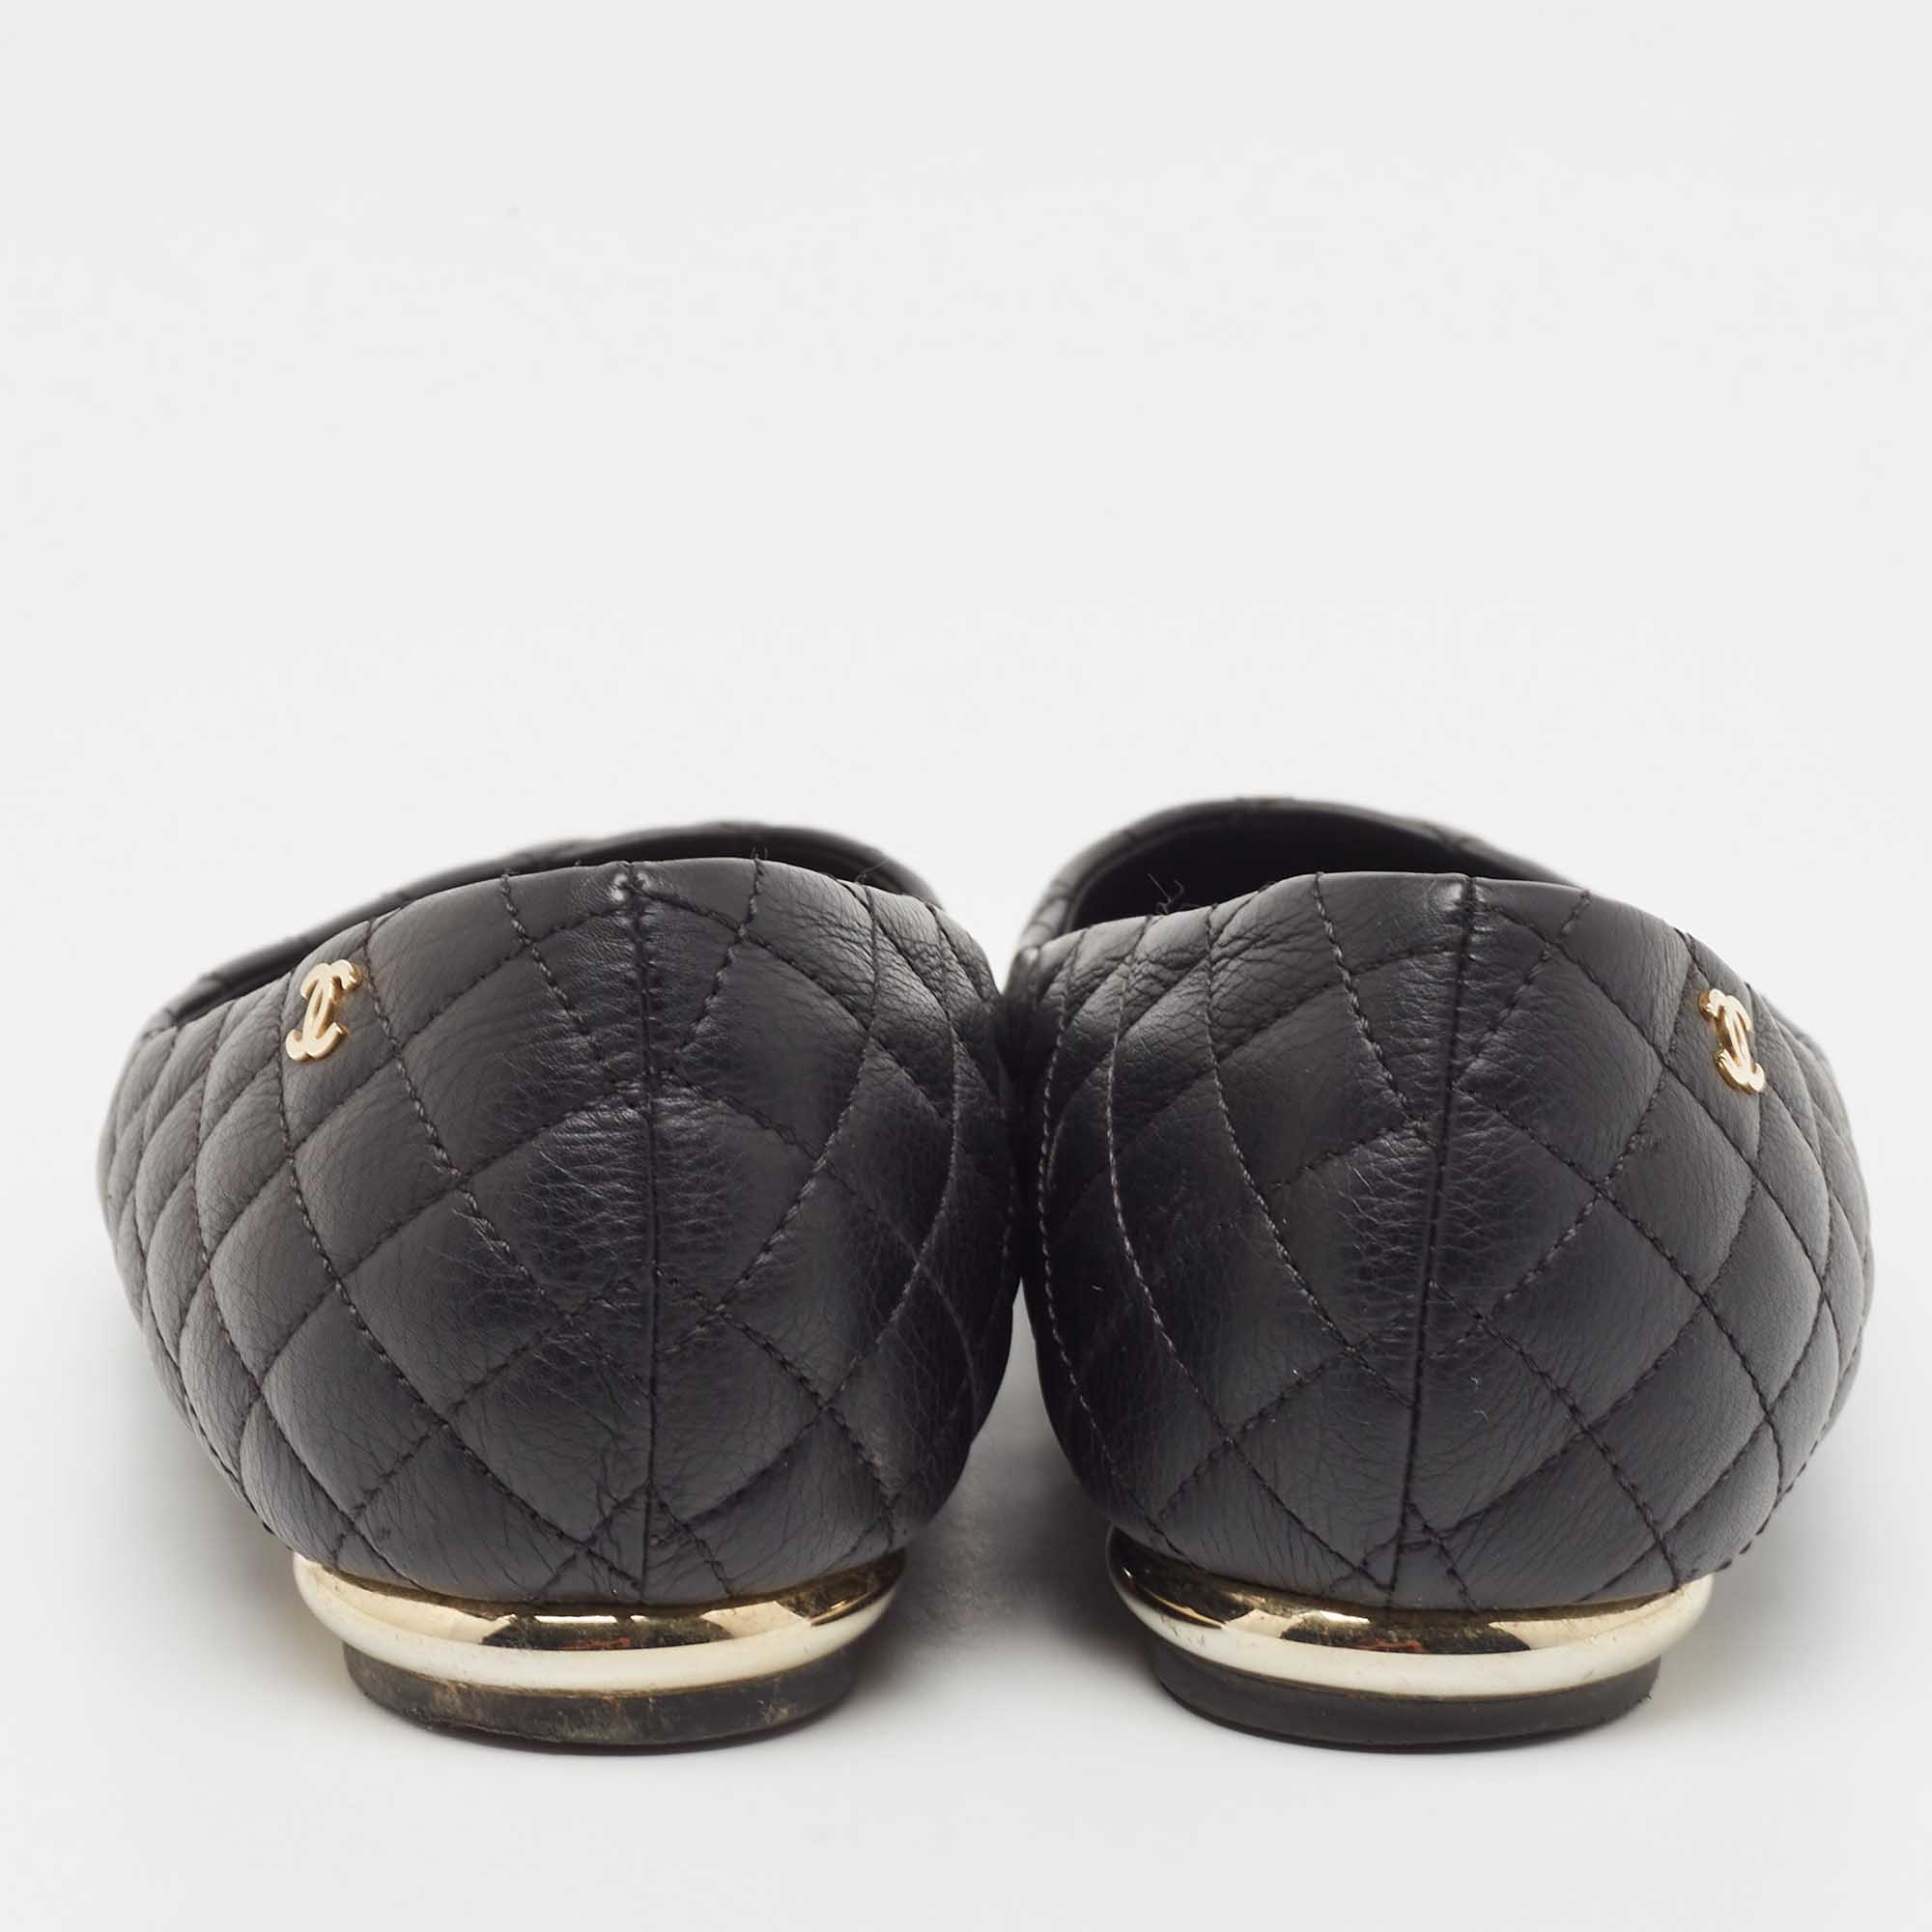 Chanel Black Quilted Leather CC Ballet Flats Size 37